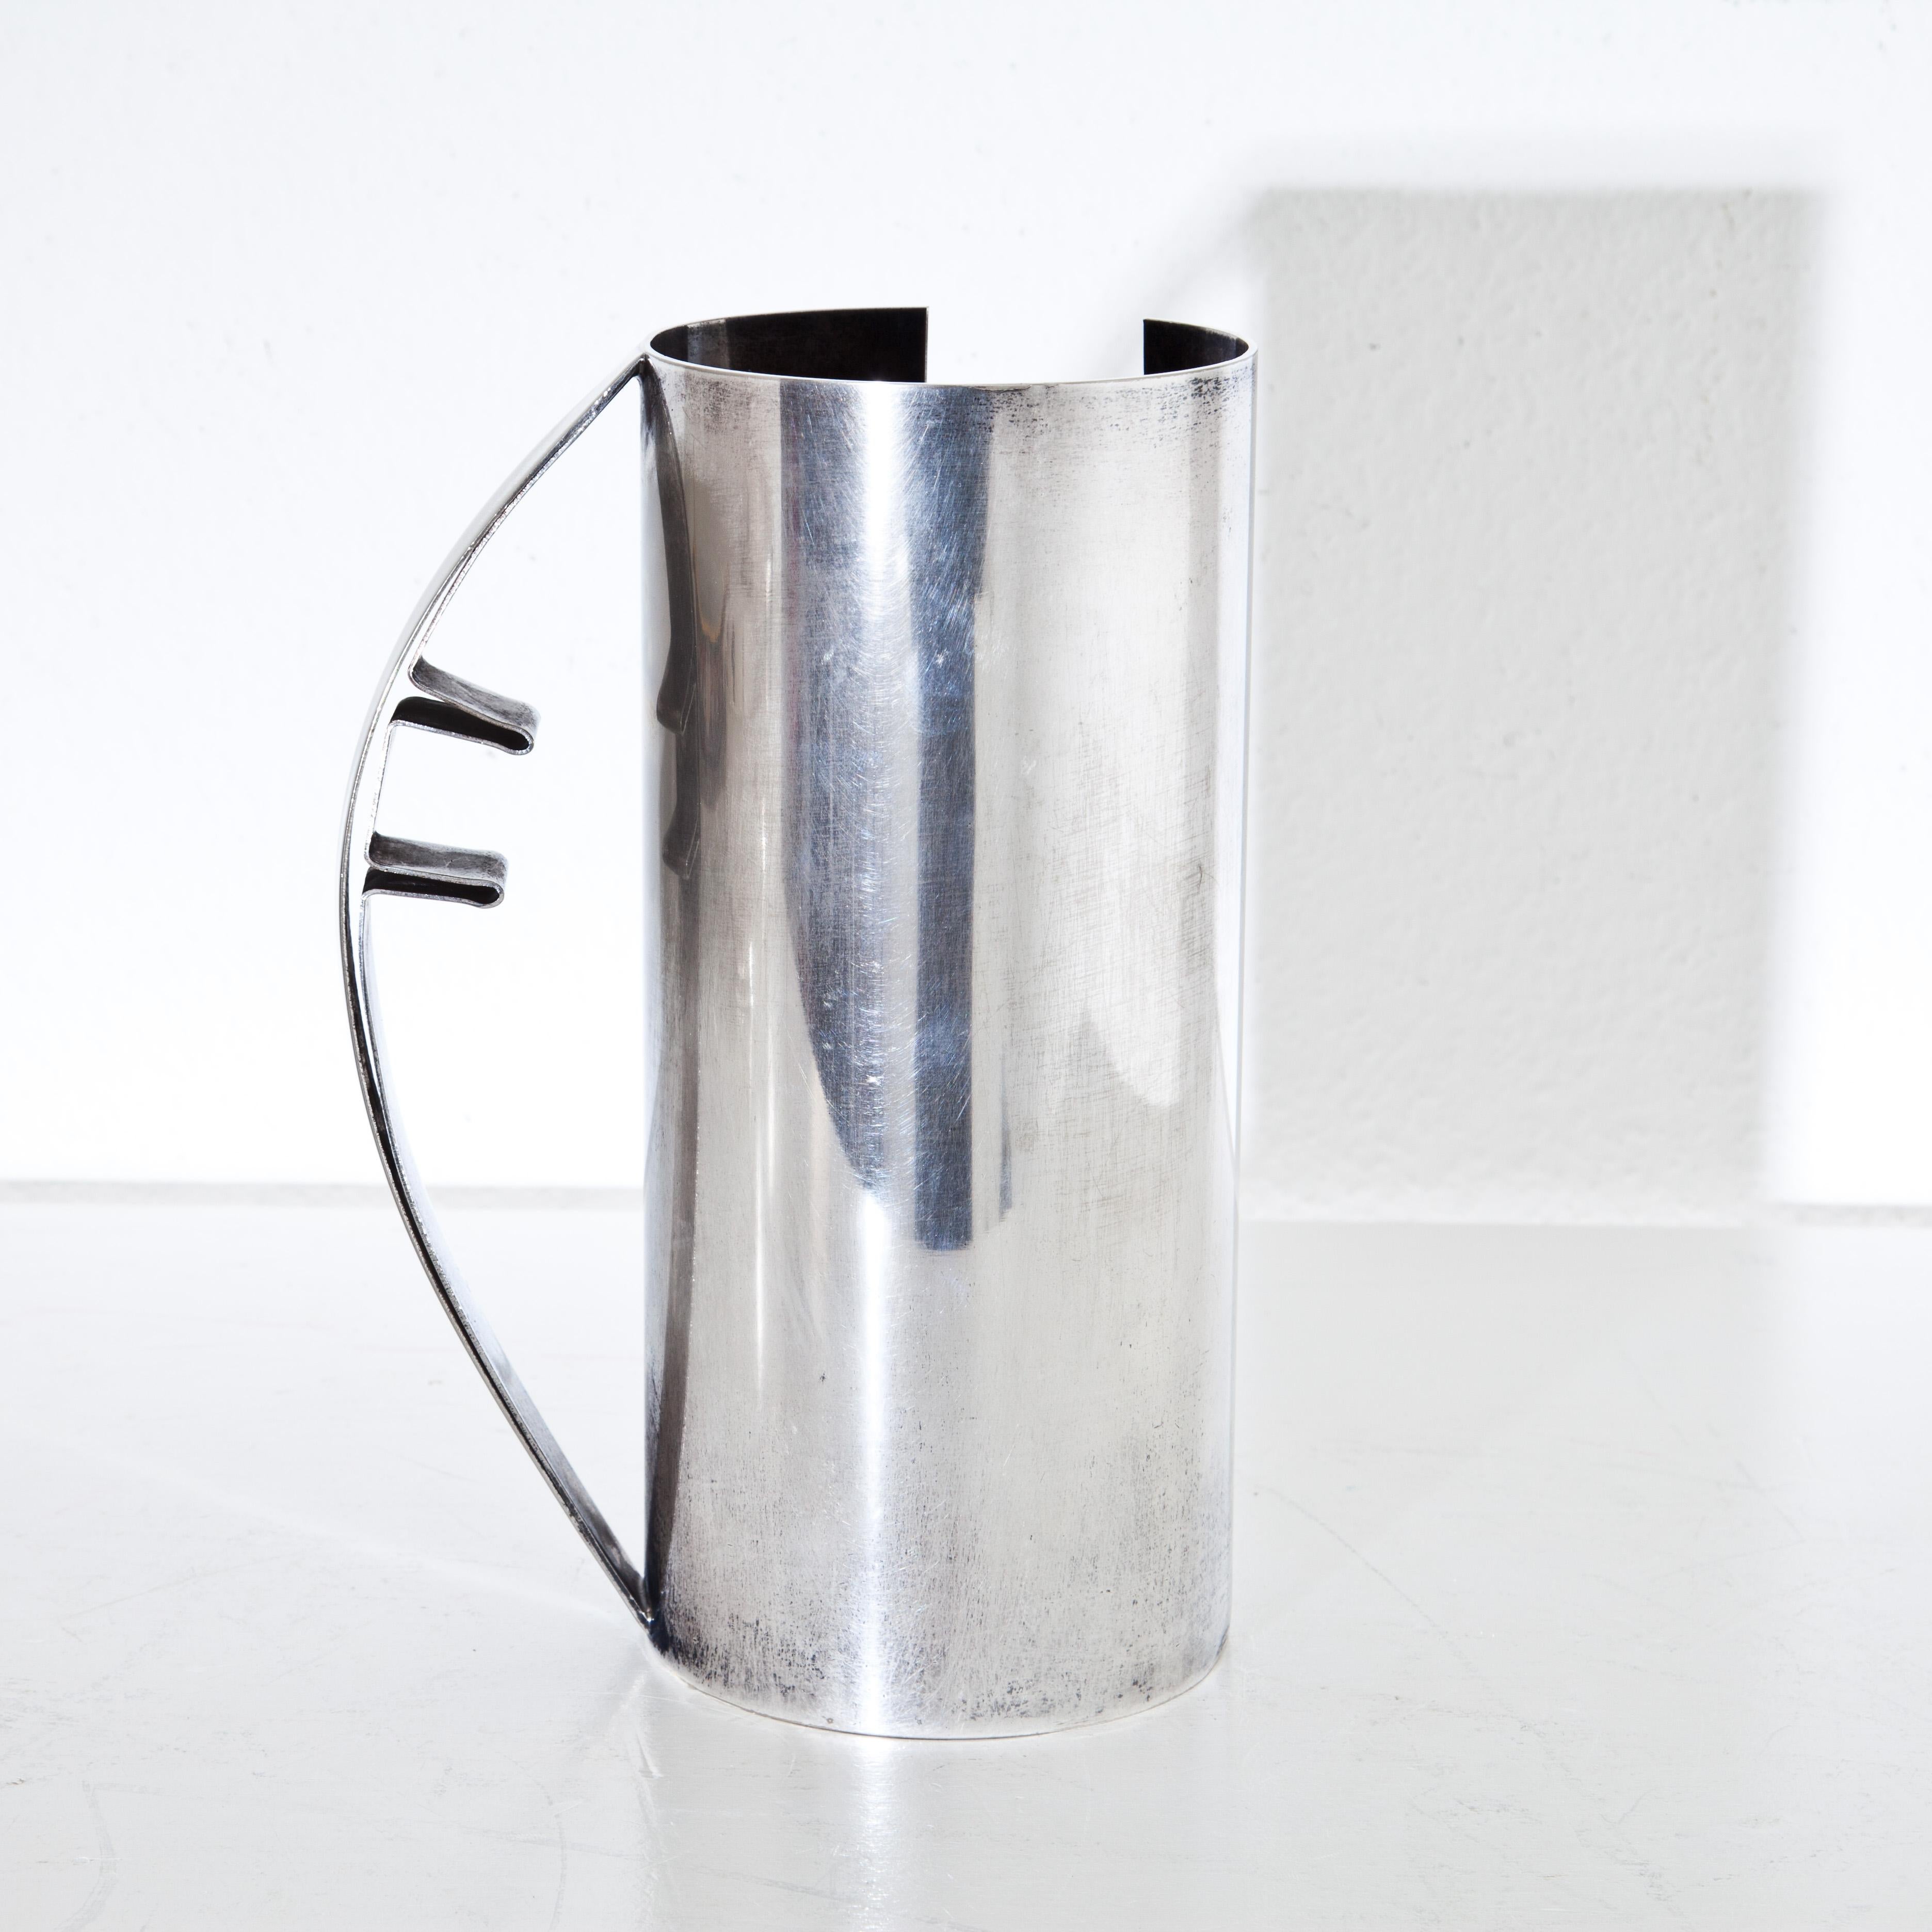 Late 20th Century Carlo Scarpa Pitcher for Cleto Murani, Italy 1970s, Silver Plated